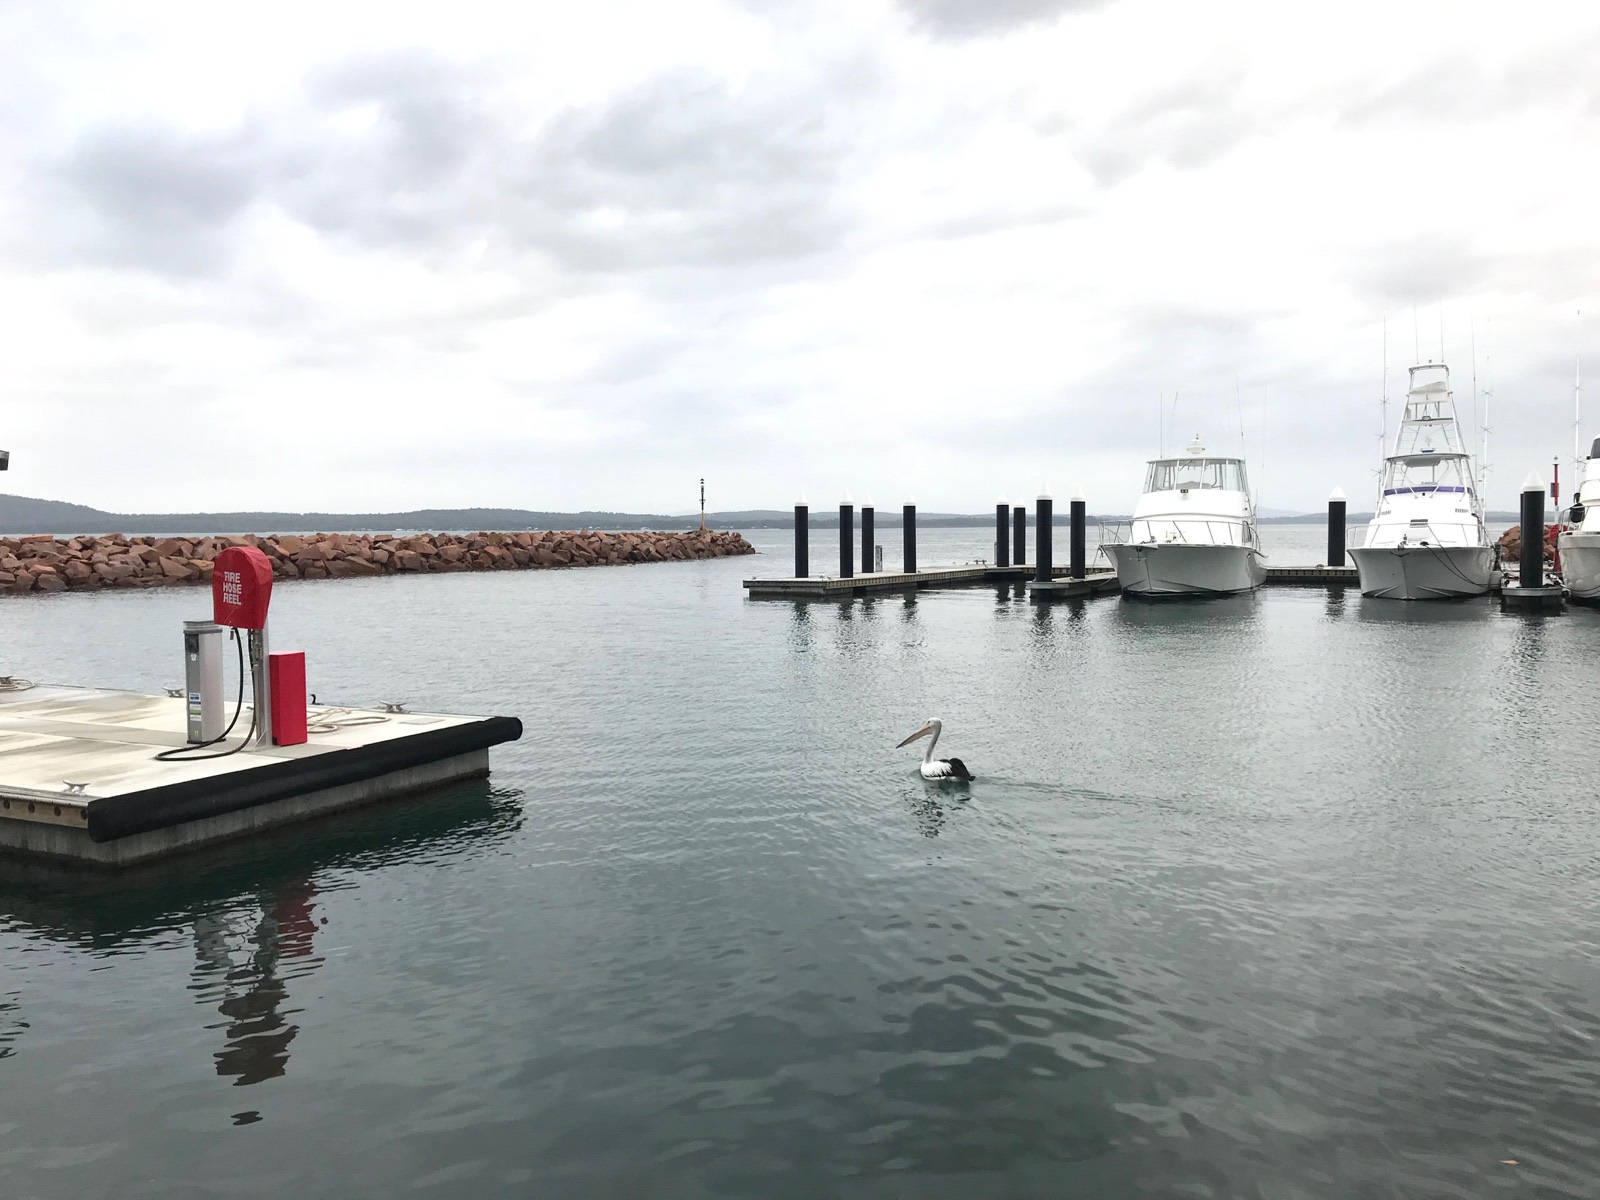 A view of a marina on a cloudy day. A pelican can be seen in the water, and boats are docked in the background